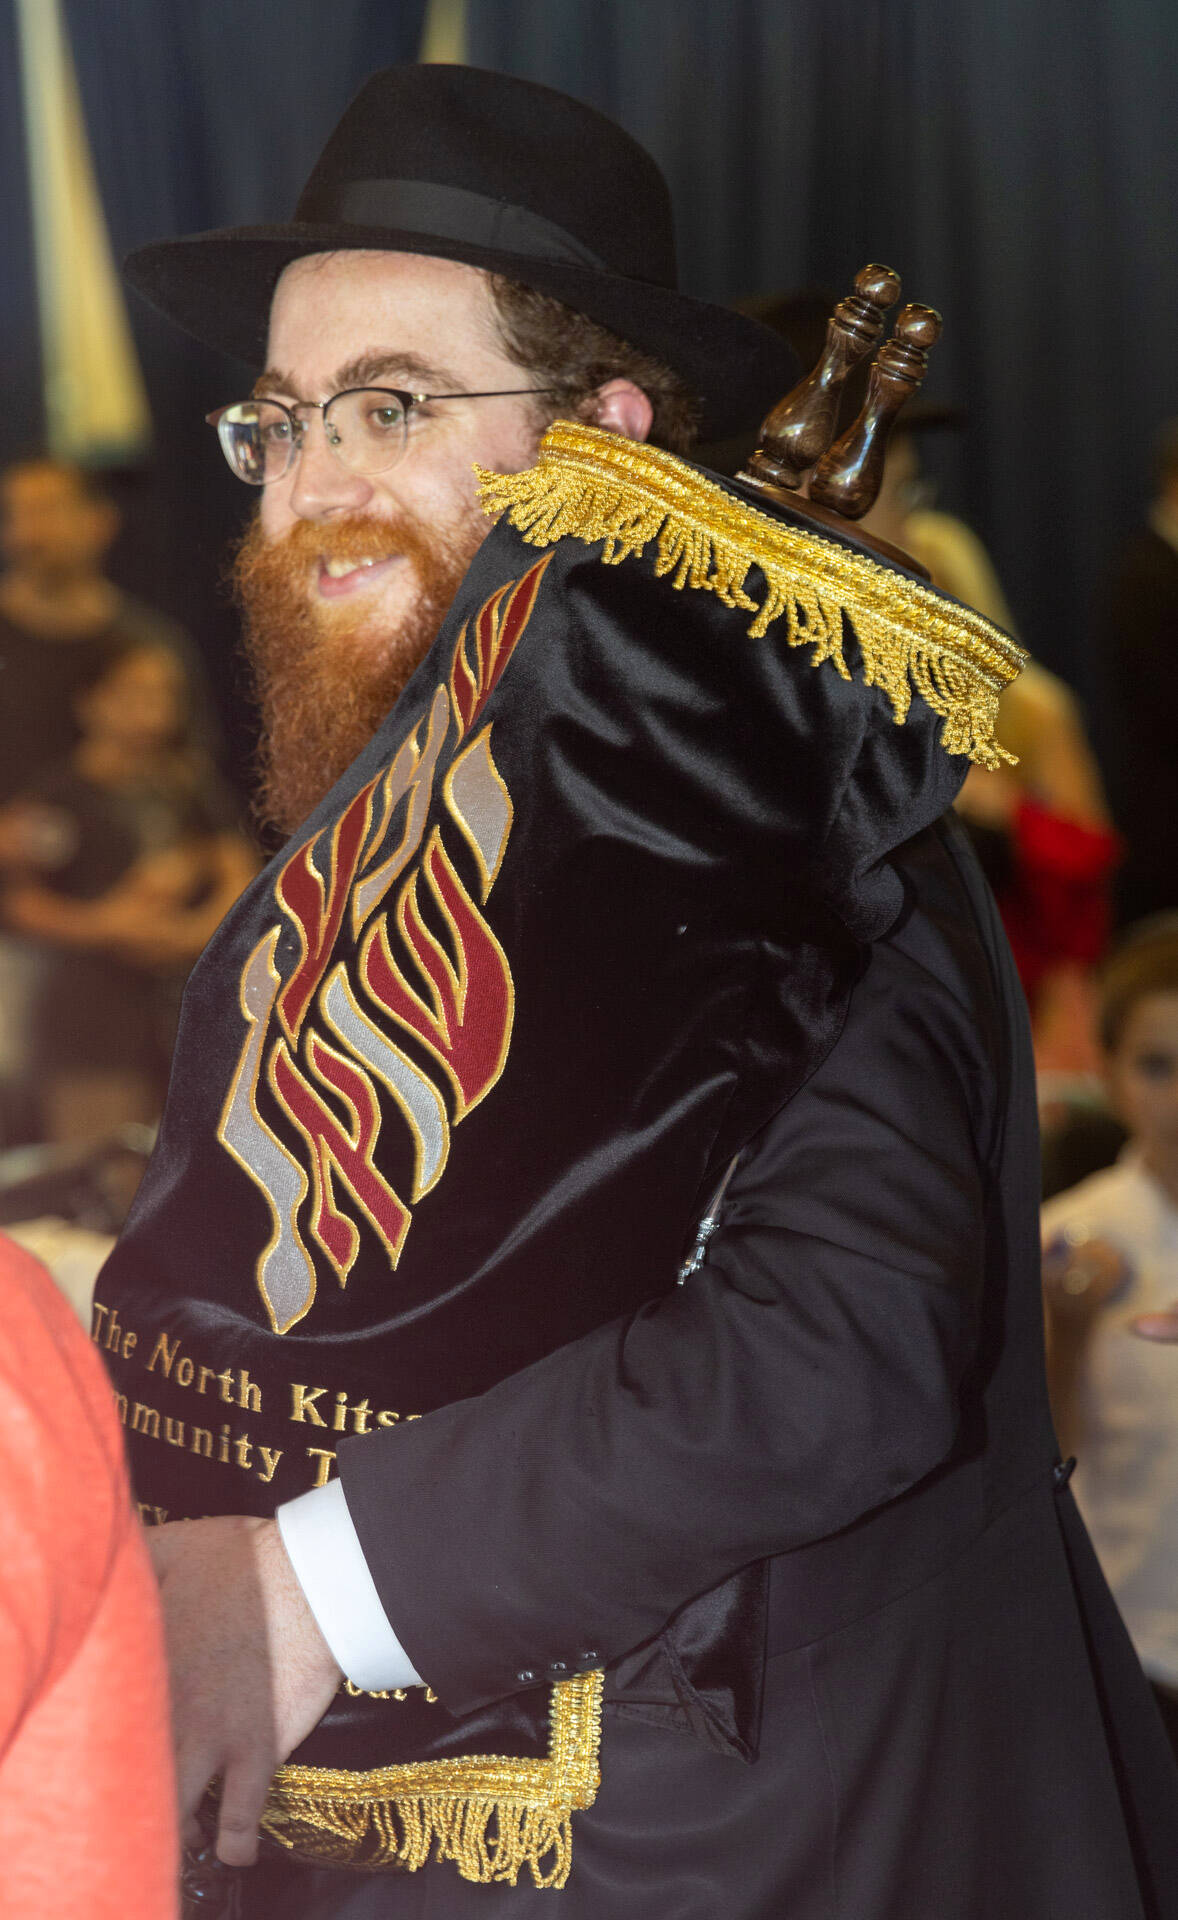 Rabbi Mendy Goldshmid carries the sacred Torah during the ceremony hosted by the Chabad Jewish Center of Bainbridge Island and North Kitsap.